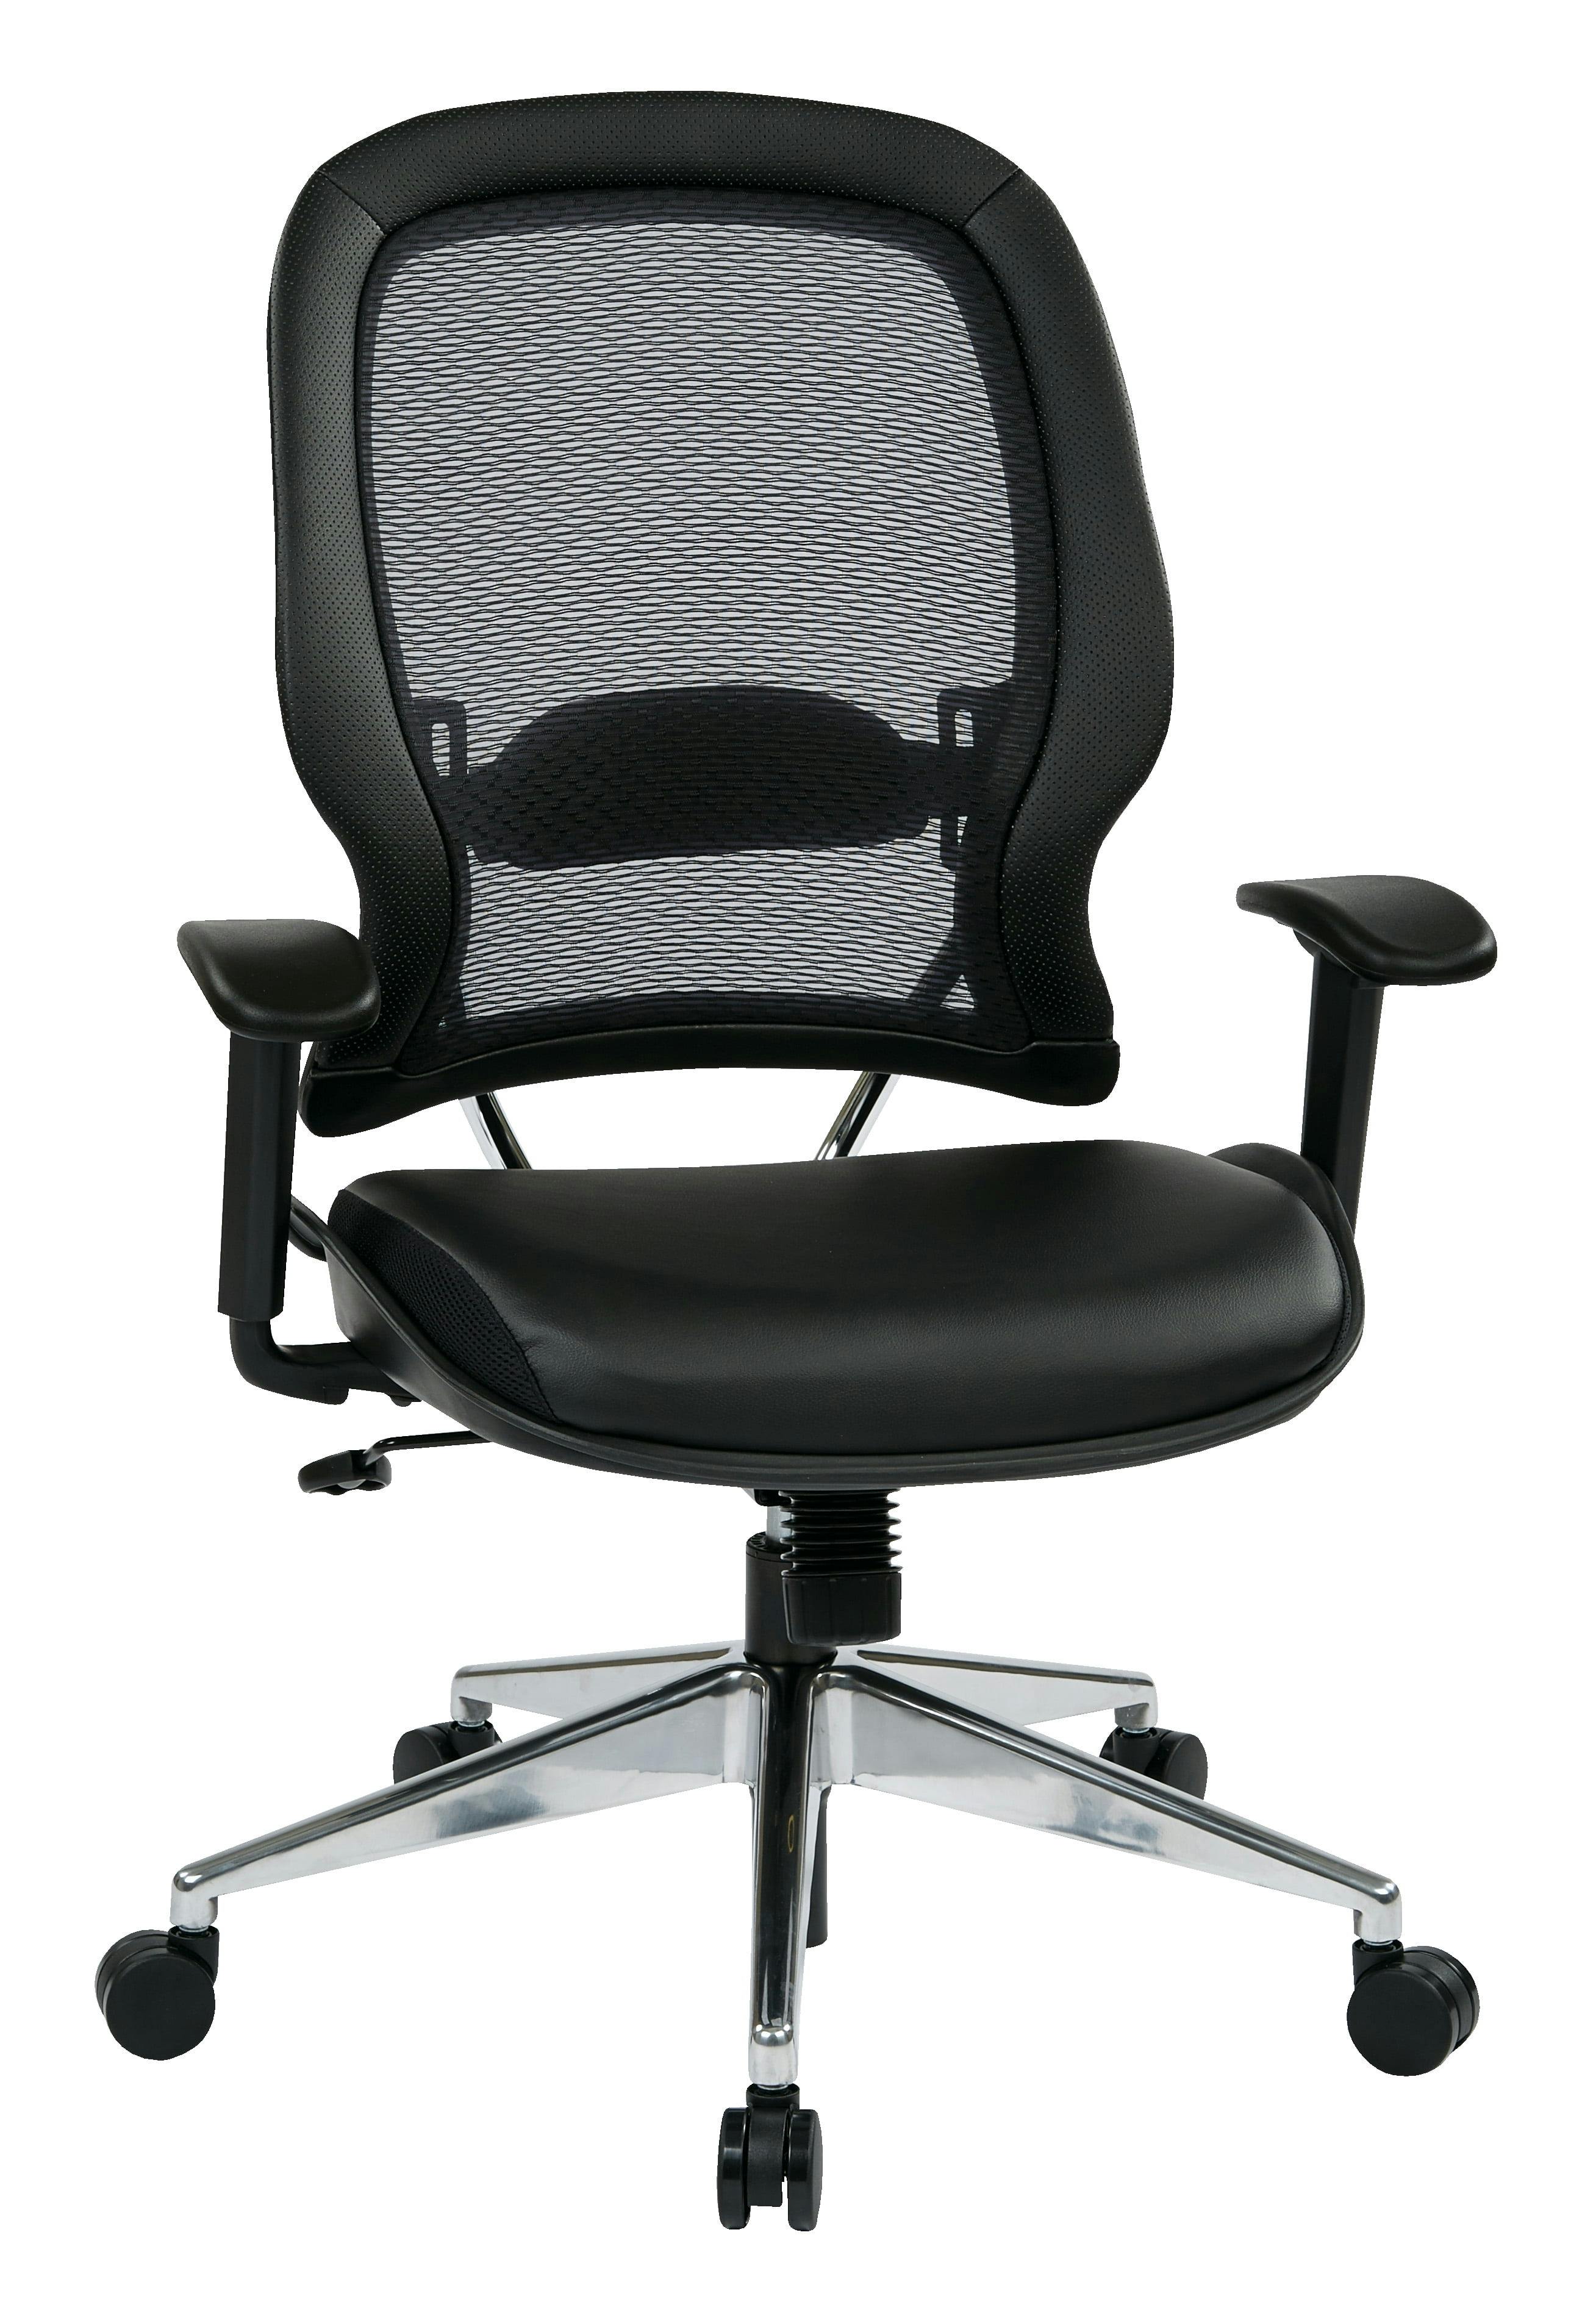 ErgoExecutive Black Mesh and Leather Swivel Chair with Chrome Base